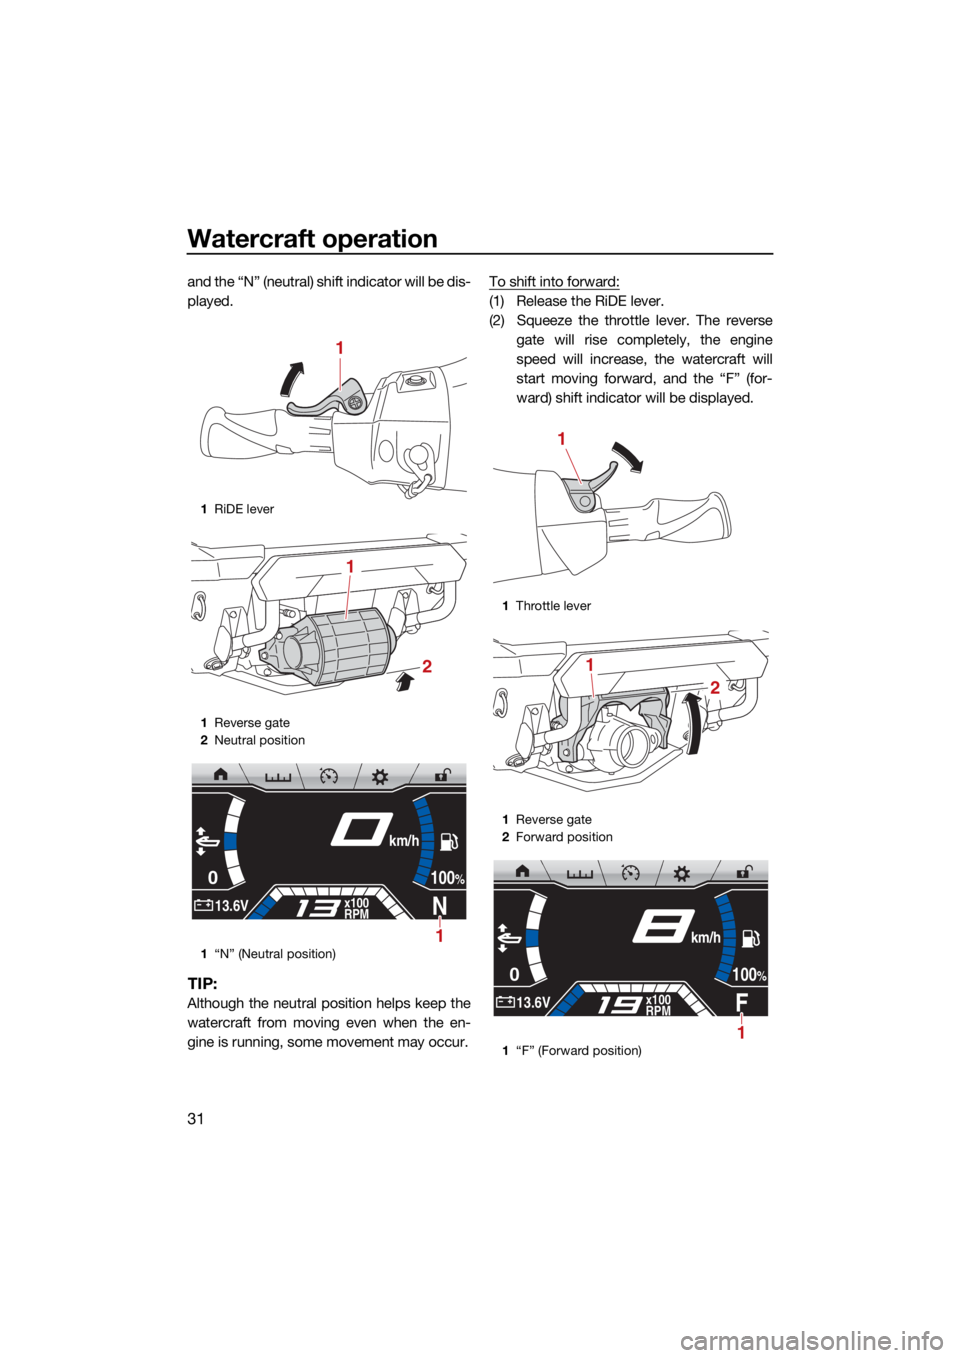 YAMAHA FX HO CRUISER 2021 Owners Guide Watercraft operation
31
and the “N” (neutral) shift indicator will be dis-
played.
TIP:
Although the neutral position helps keep the
watercraft from moving even when the en-
gine is running, some 